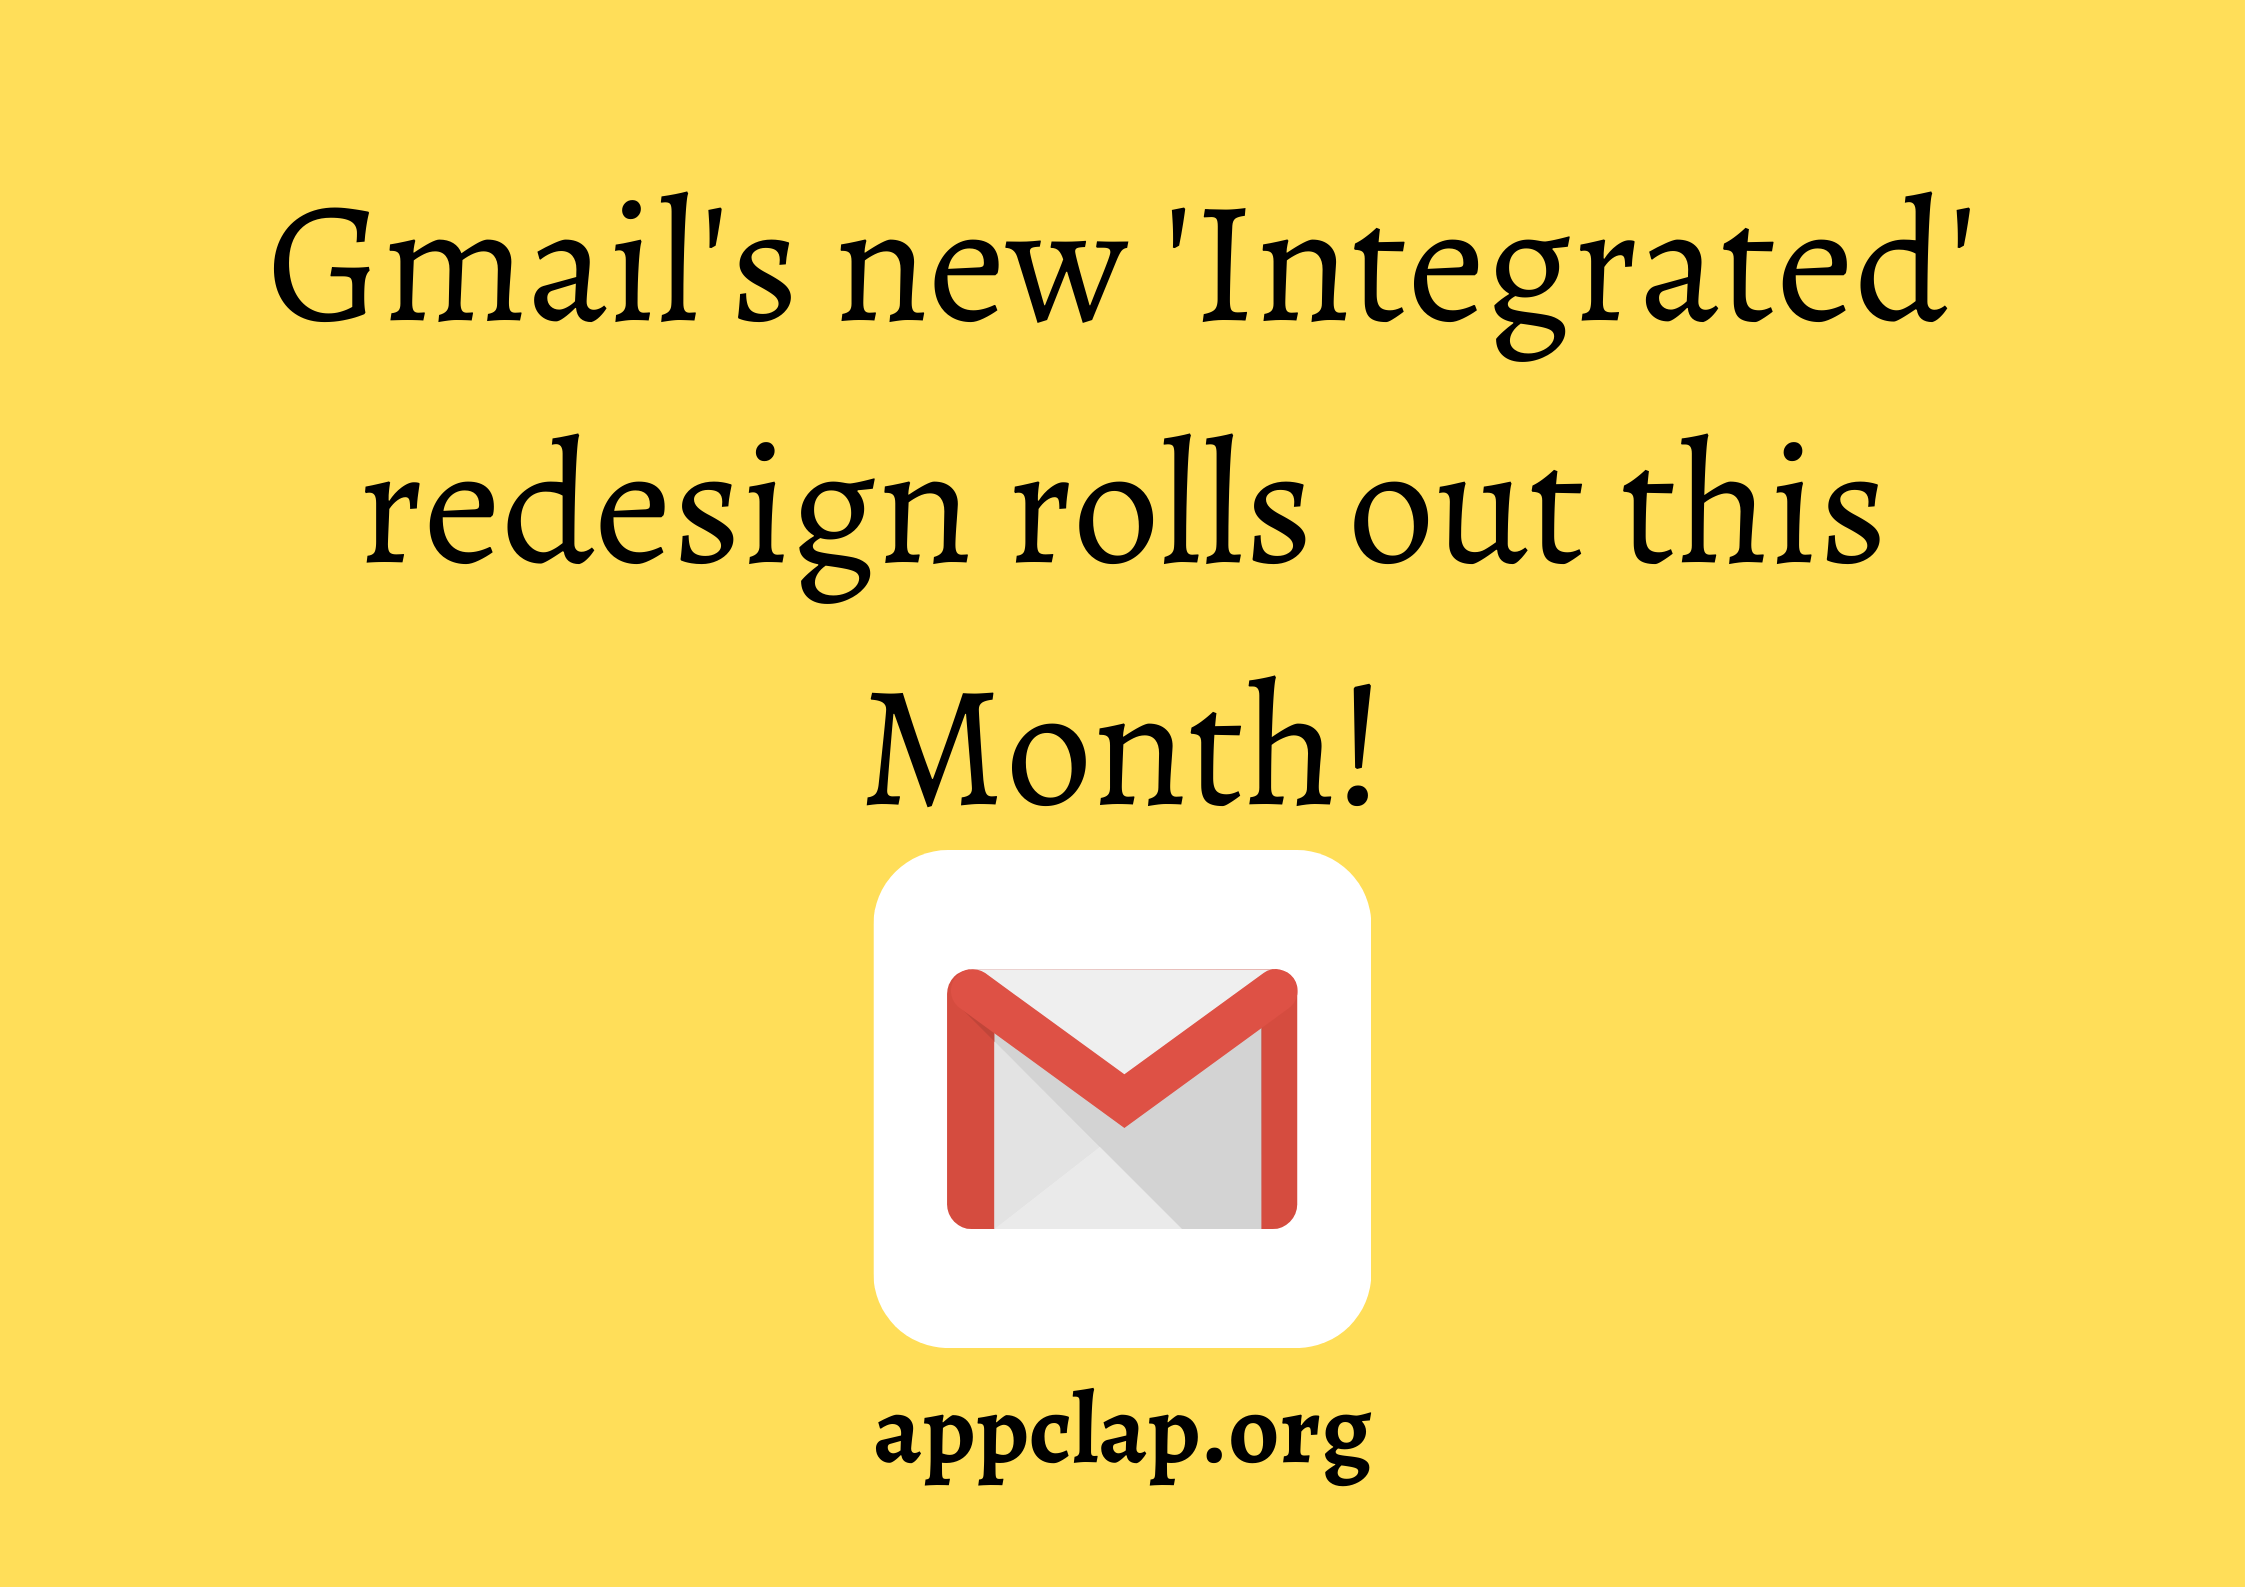 Gmail's new 'Integrated' redesign rolls out this Month!